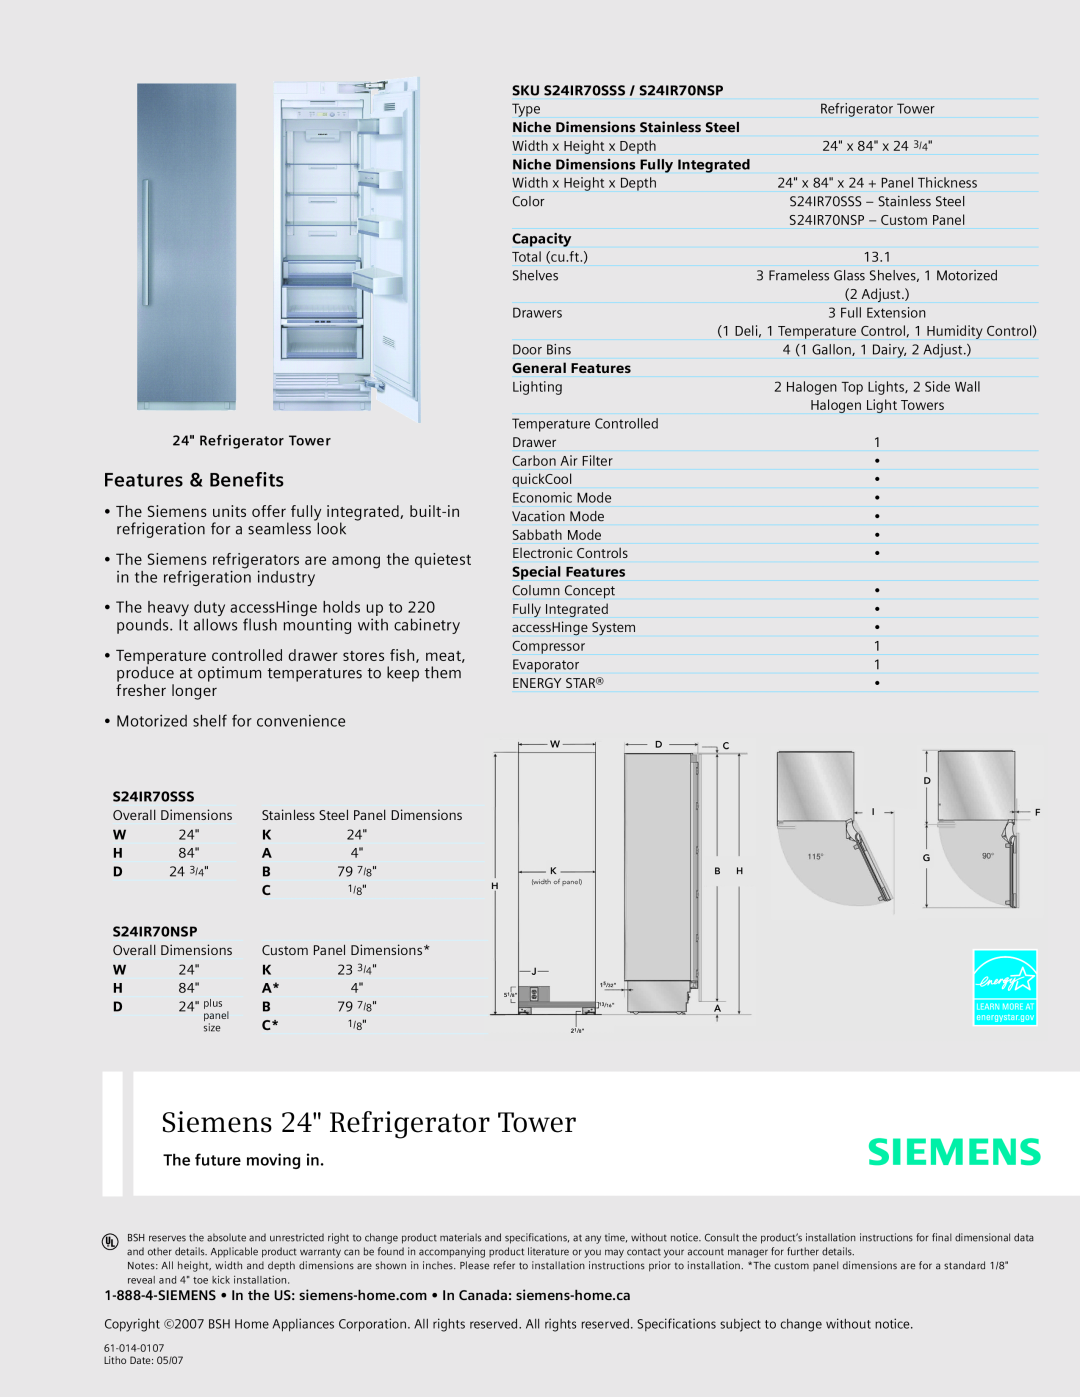 Siemens S24IR70SSS dimensions Siemens 24 Refrigerator Tower, Features & Benefits, The future moving in 